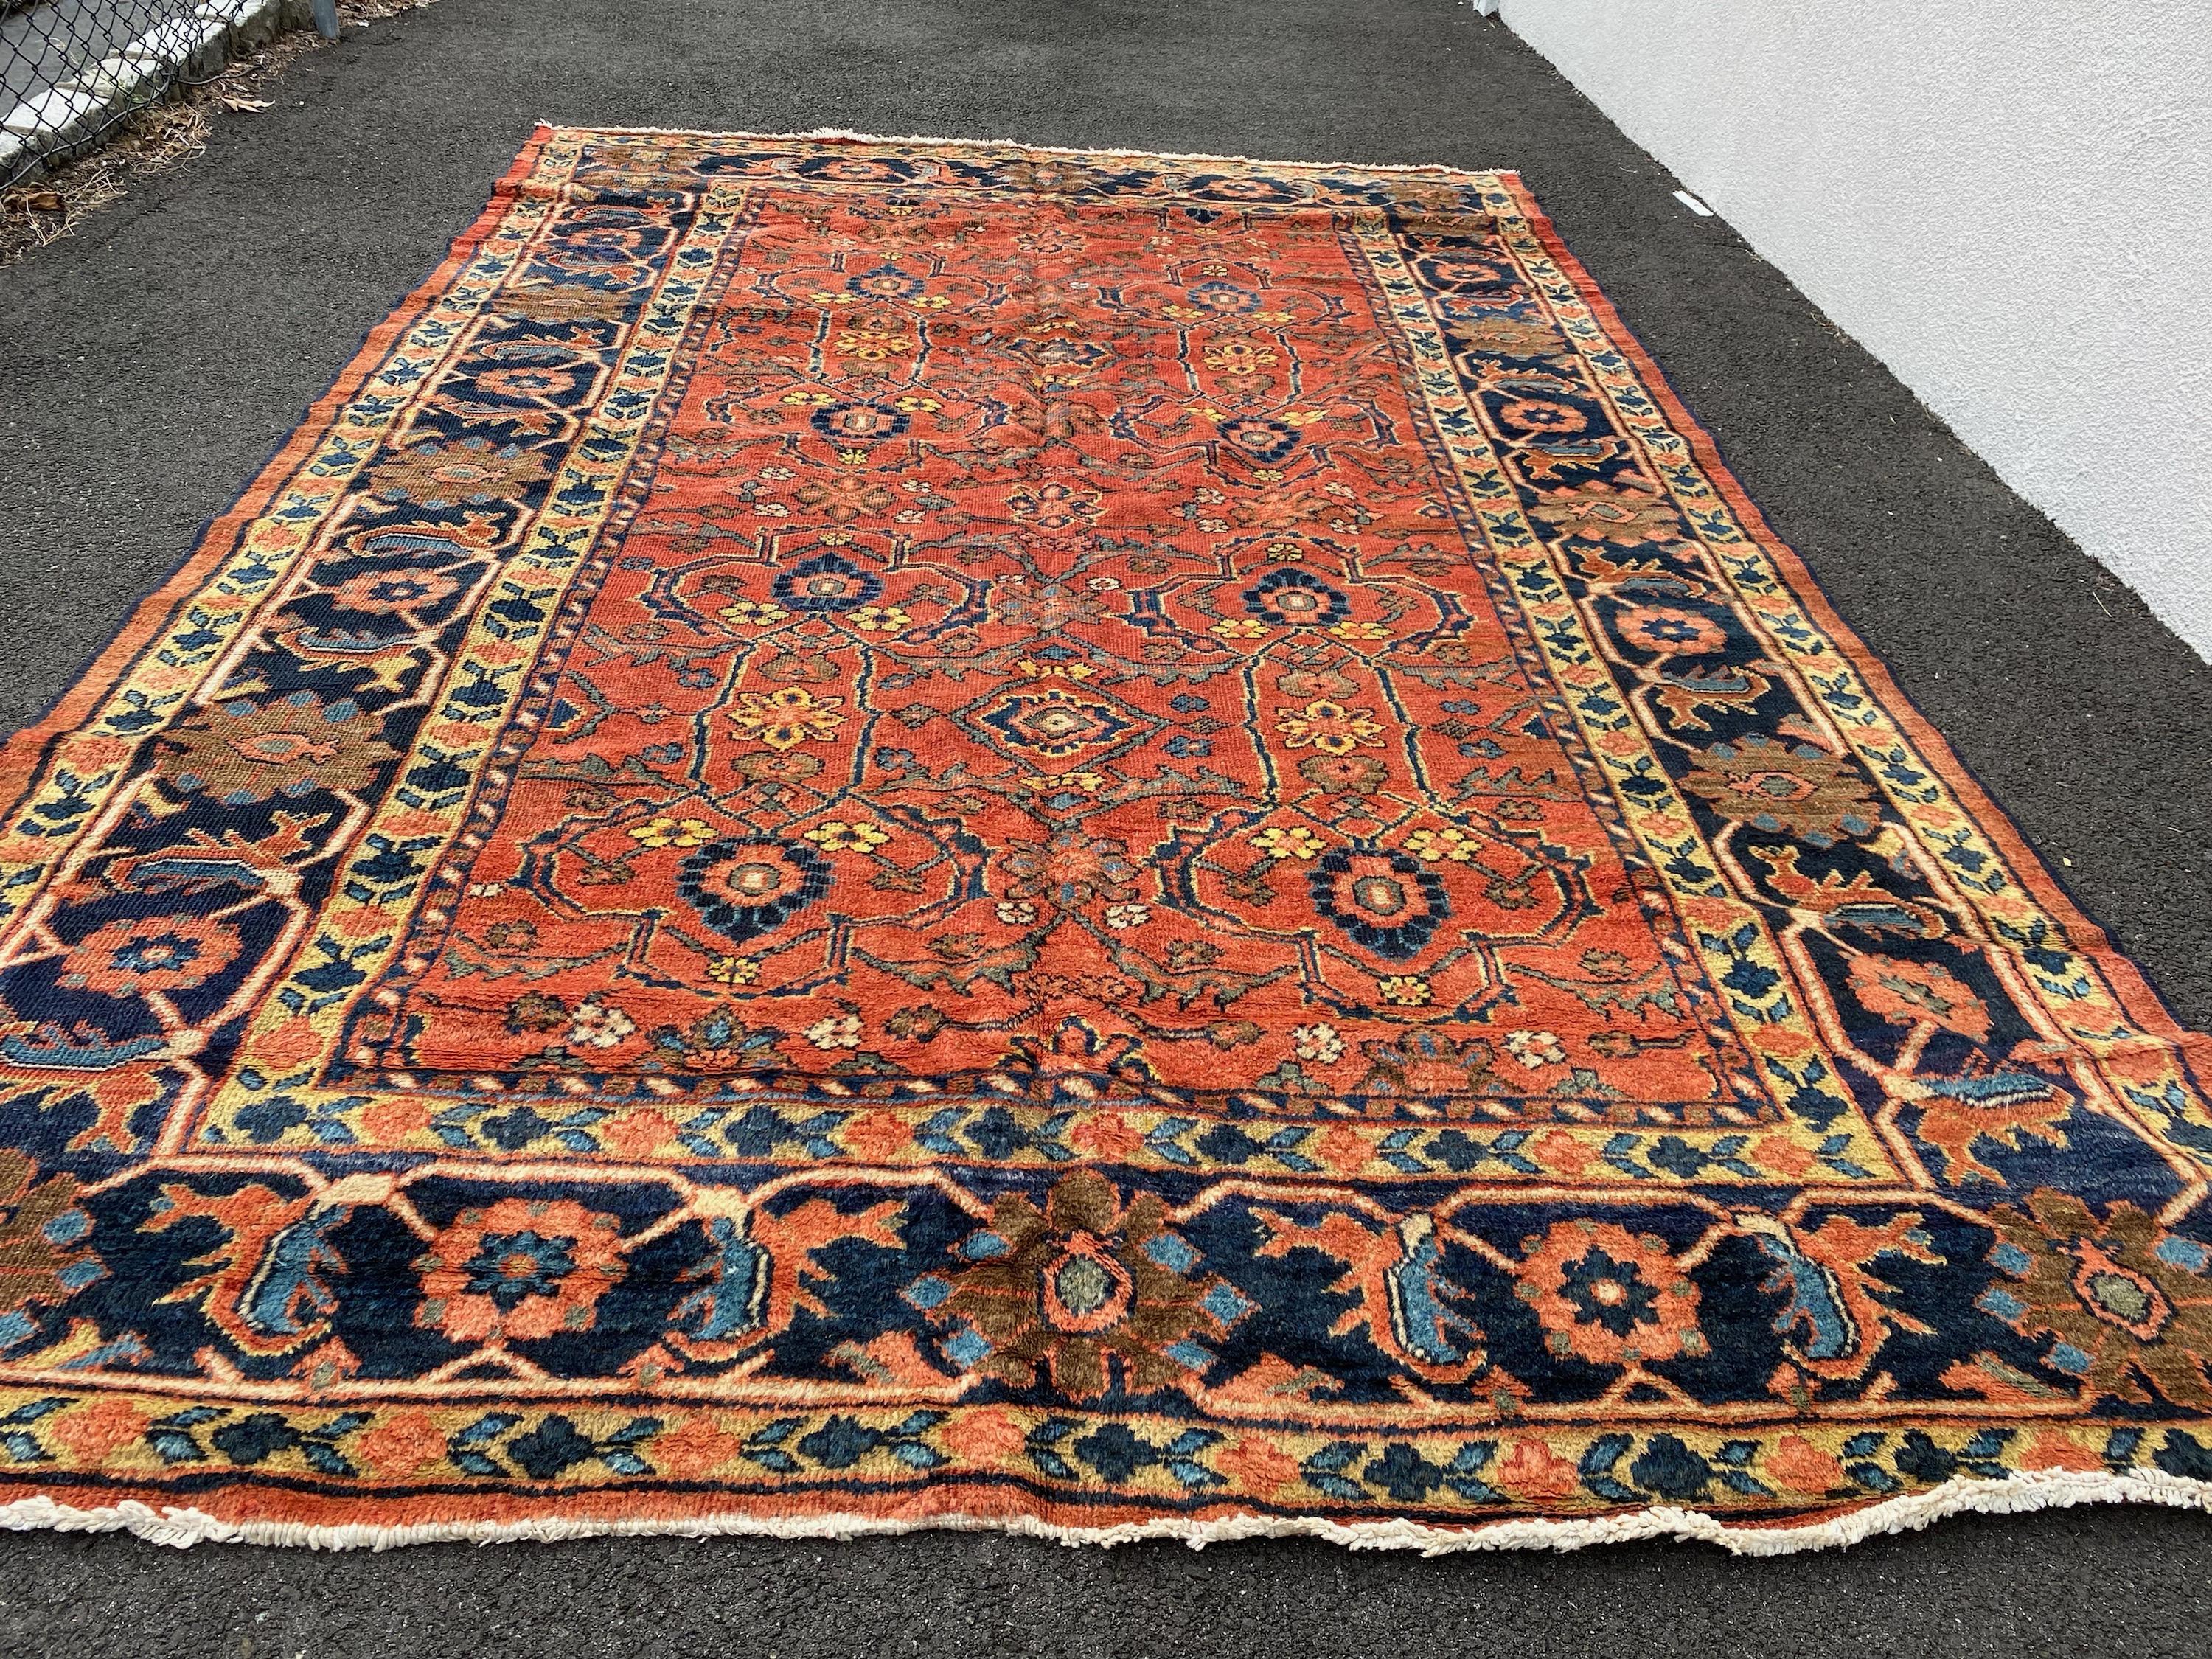 Persian Mahal carpets have made quite a name for themselves among the weaving culture since the 19th century. The sophisticated and quirky design of these beauties is what separates them from the rest of the carpets. They’re highly decorative when